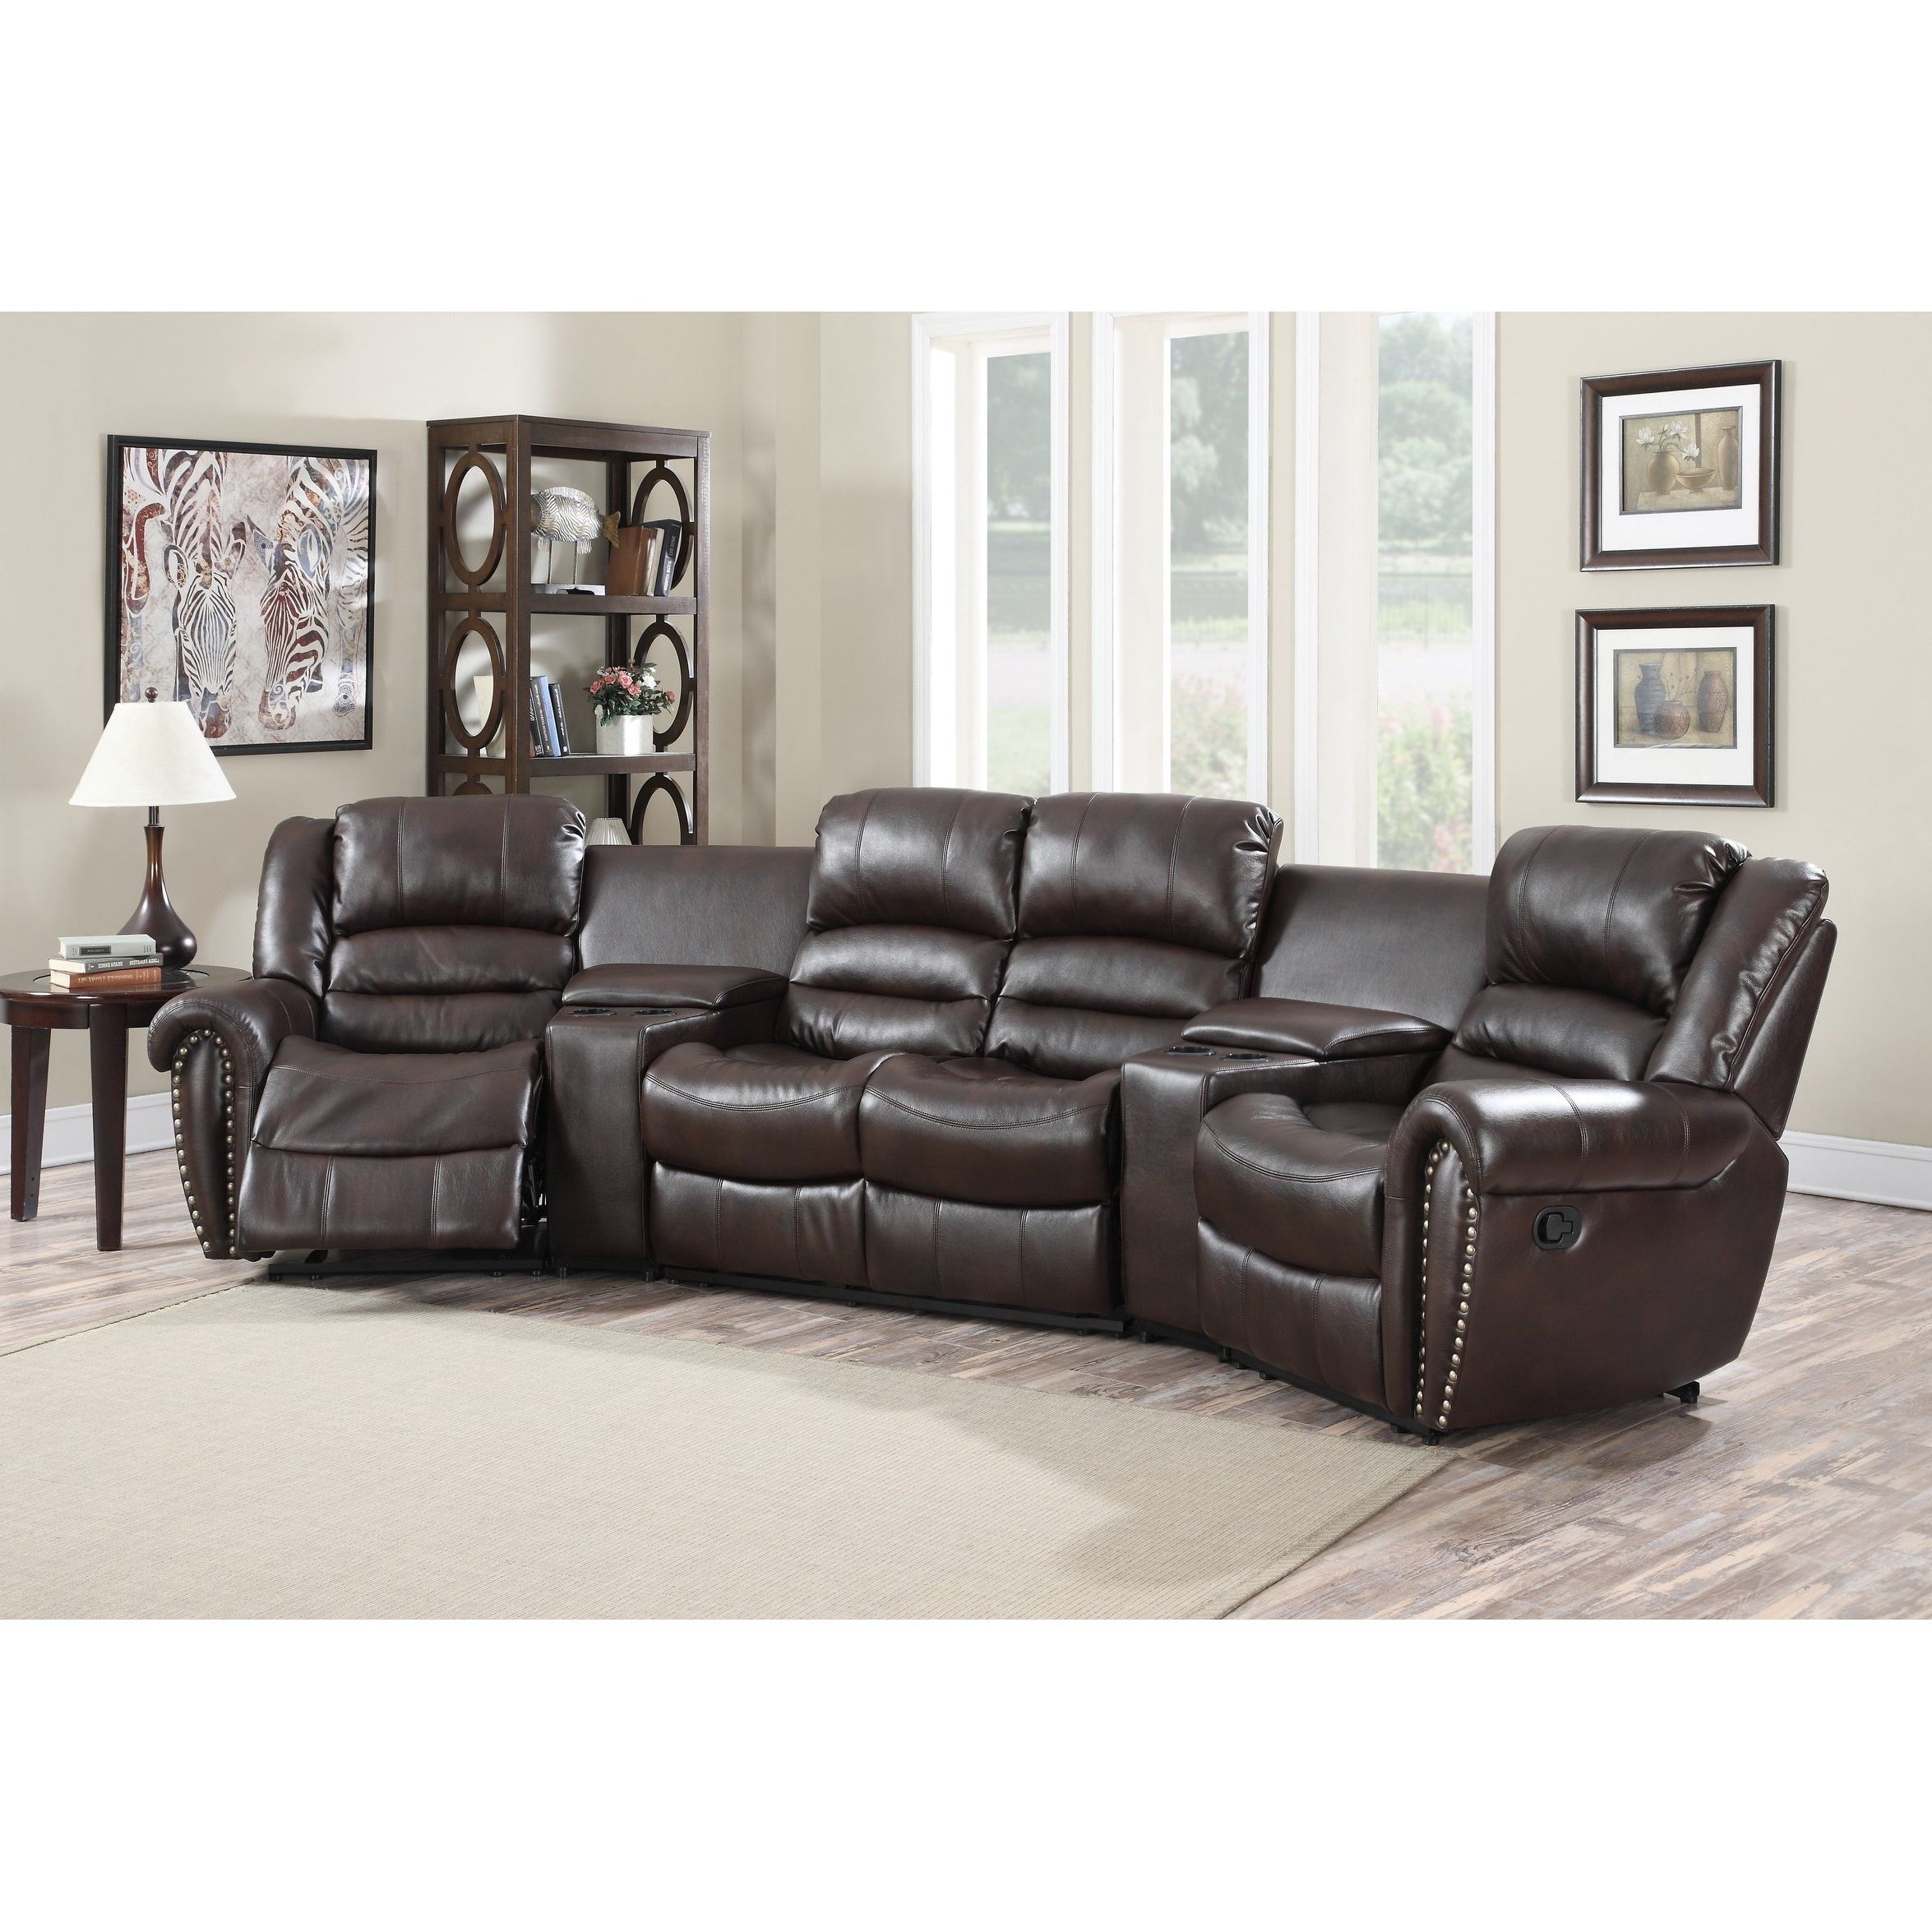 Abigail Ii Sofa Chairs Pertaining To Most Recently Released Shop Lyke Home Abigail Burgundy Leather Gel Movie Theater Recliner (View 18 of 20)